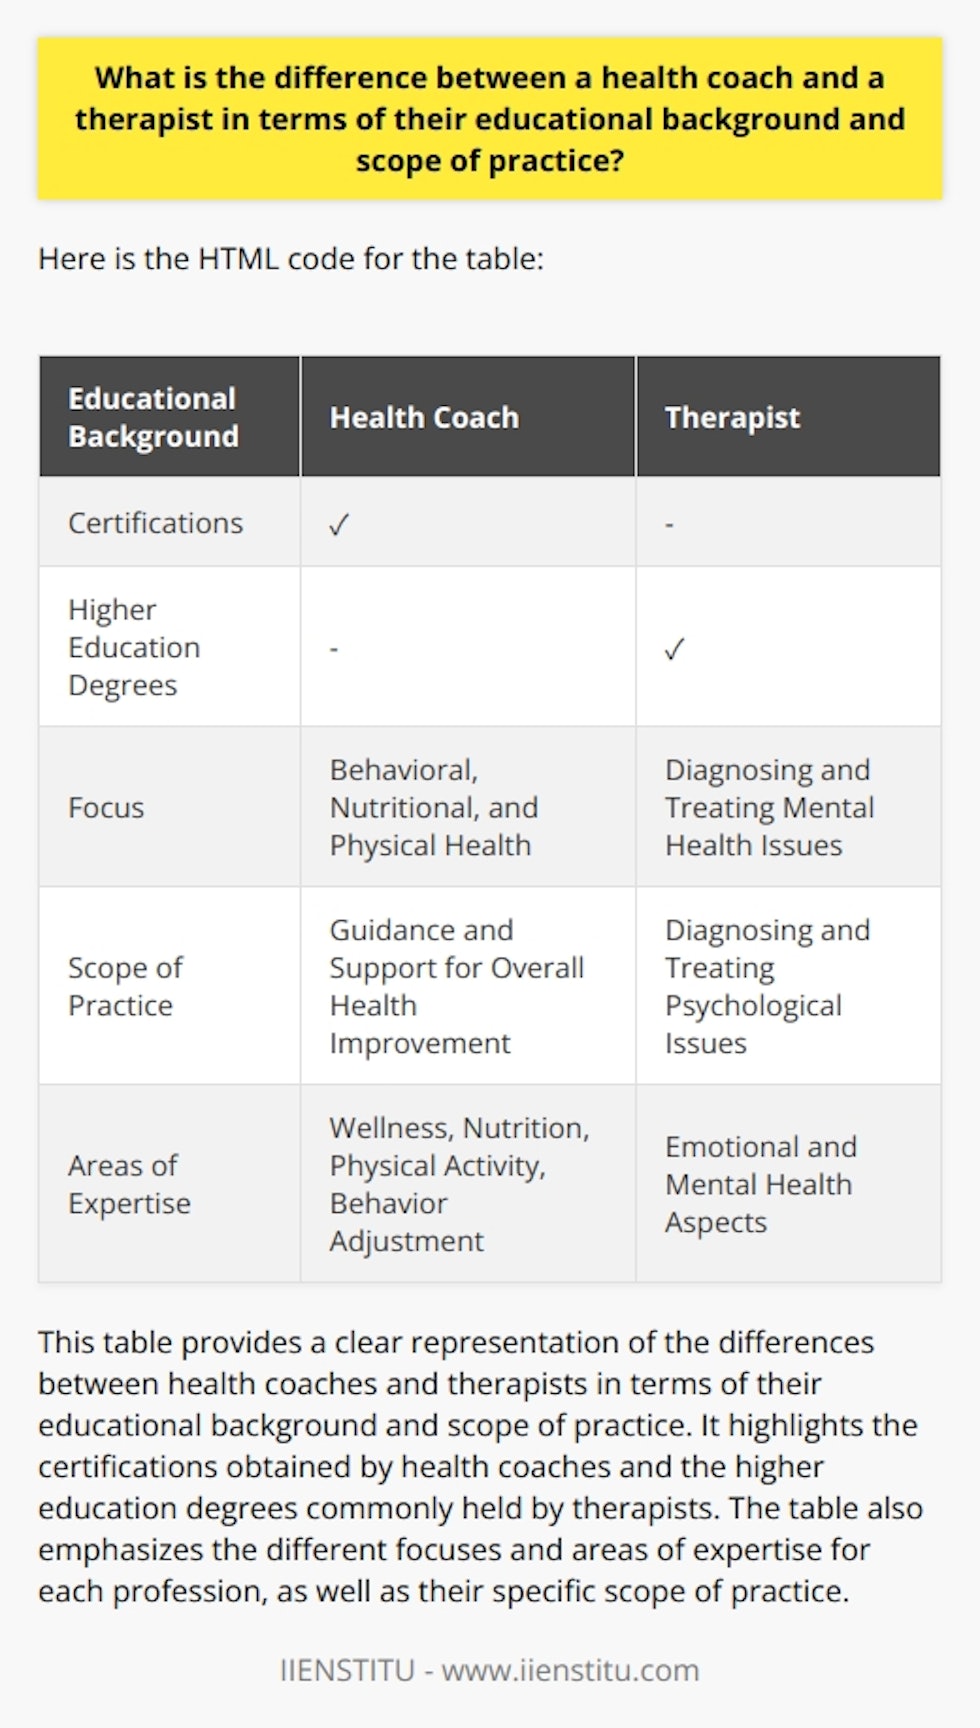 In conclusion, the educational backgrounds and scope of practice for health coaches and therapists differ significantly. Health coaches usually earn certifications from accredited programs and focus on behavioral, nutritional, and physical health. Therapists, on the other hand, often hold higher education degrees in psychology, counseling, social work, or a related field. Their focus is on diagnosing and treating mental health issues.In terms of scope of practice, health coaches primarily provide guidance and support for overall health improvement, focusing on wellness, nutrition, physical activity, and behavior adjustments. They empower clients to achieve their health goals. Therapists, on the other hand, delve deeper into emotional and mental health aspects, diagnosing and treating psychological issues using various therapeutic approaches tailored to each client's individual needs.It is important to understand the distinct roles of health coaches and therapists, as they serve different purposes. Health coaches can motivate and guide individuals toward healthier habits, but they do not diagnose or treat mental disorders. Therapists, on the other hand, play a critical role in diagnosing and treating mental health issues but may not typically focus on areas like nutrition or physical fitness.By recognizing these differences, clients can set clear expectations and seek appropriate help for their specific health concerns. Whether individuals need support in improving overall health or require treatment for mental health conditions, both health coaches and therapists play valuable roles in promoting well-being.